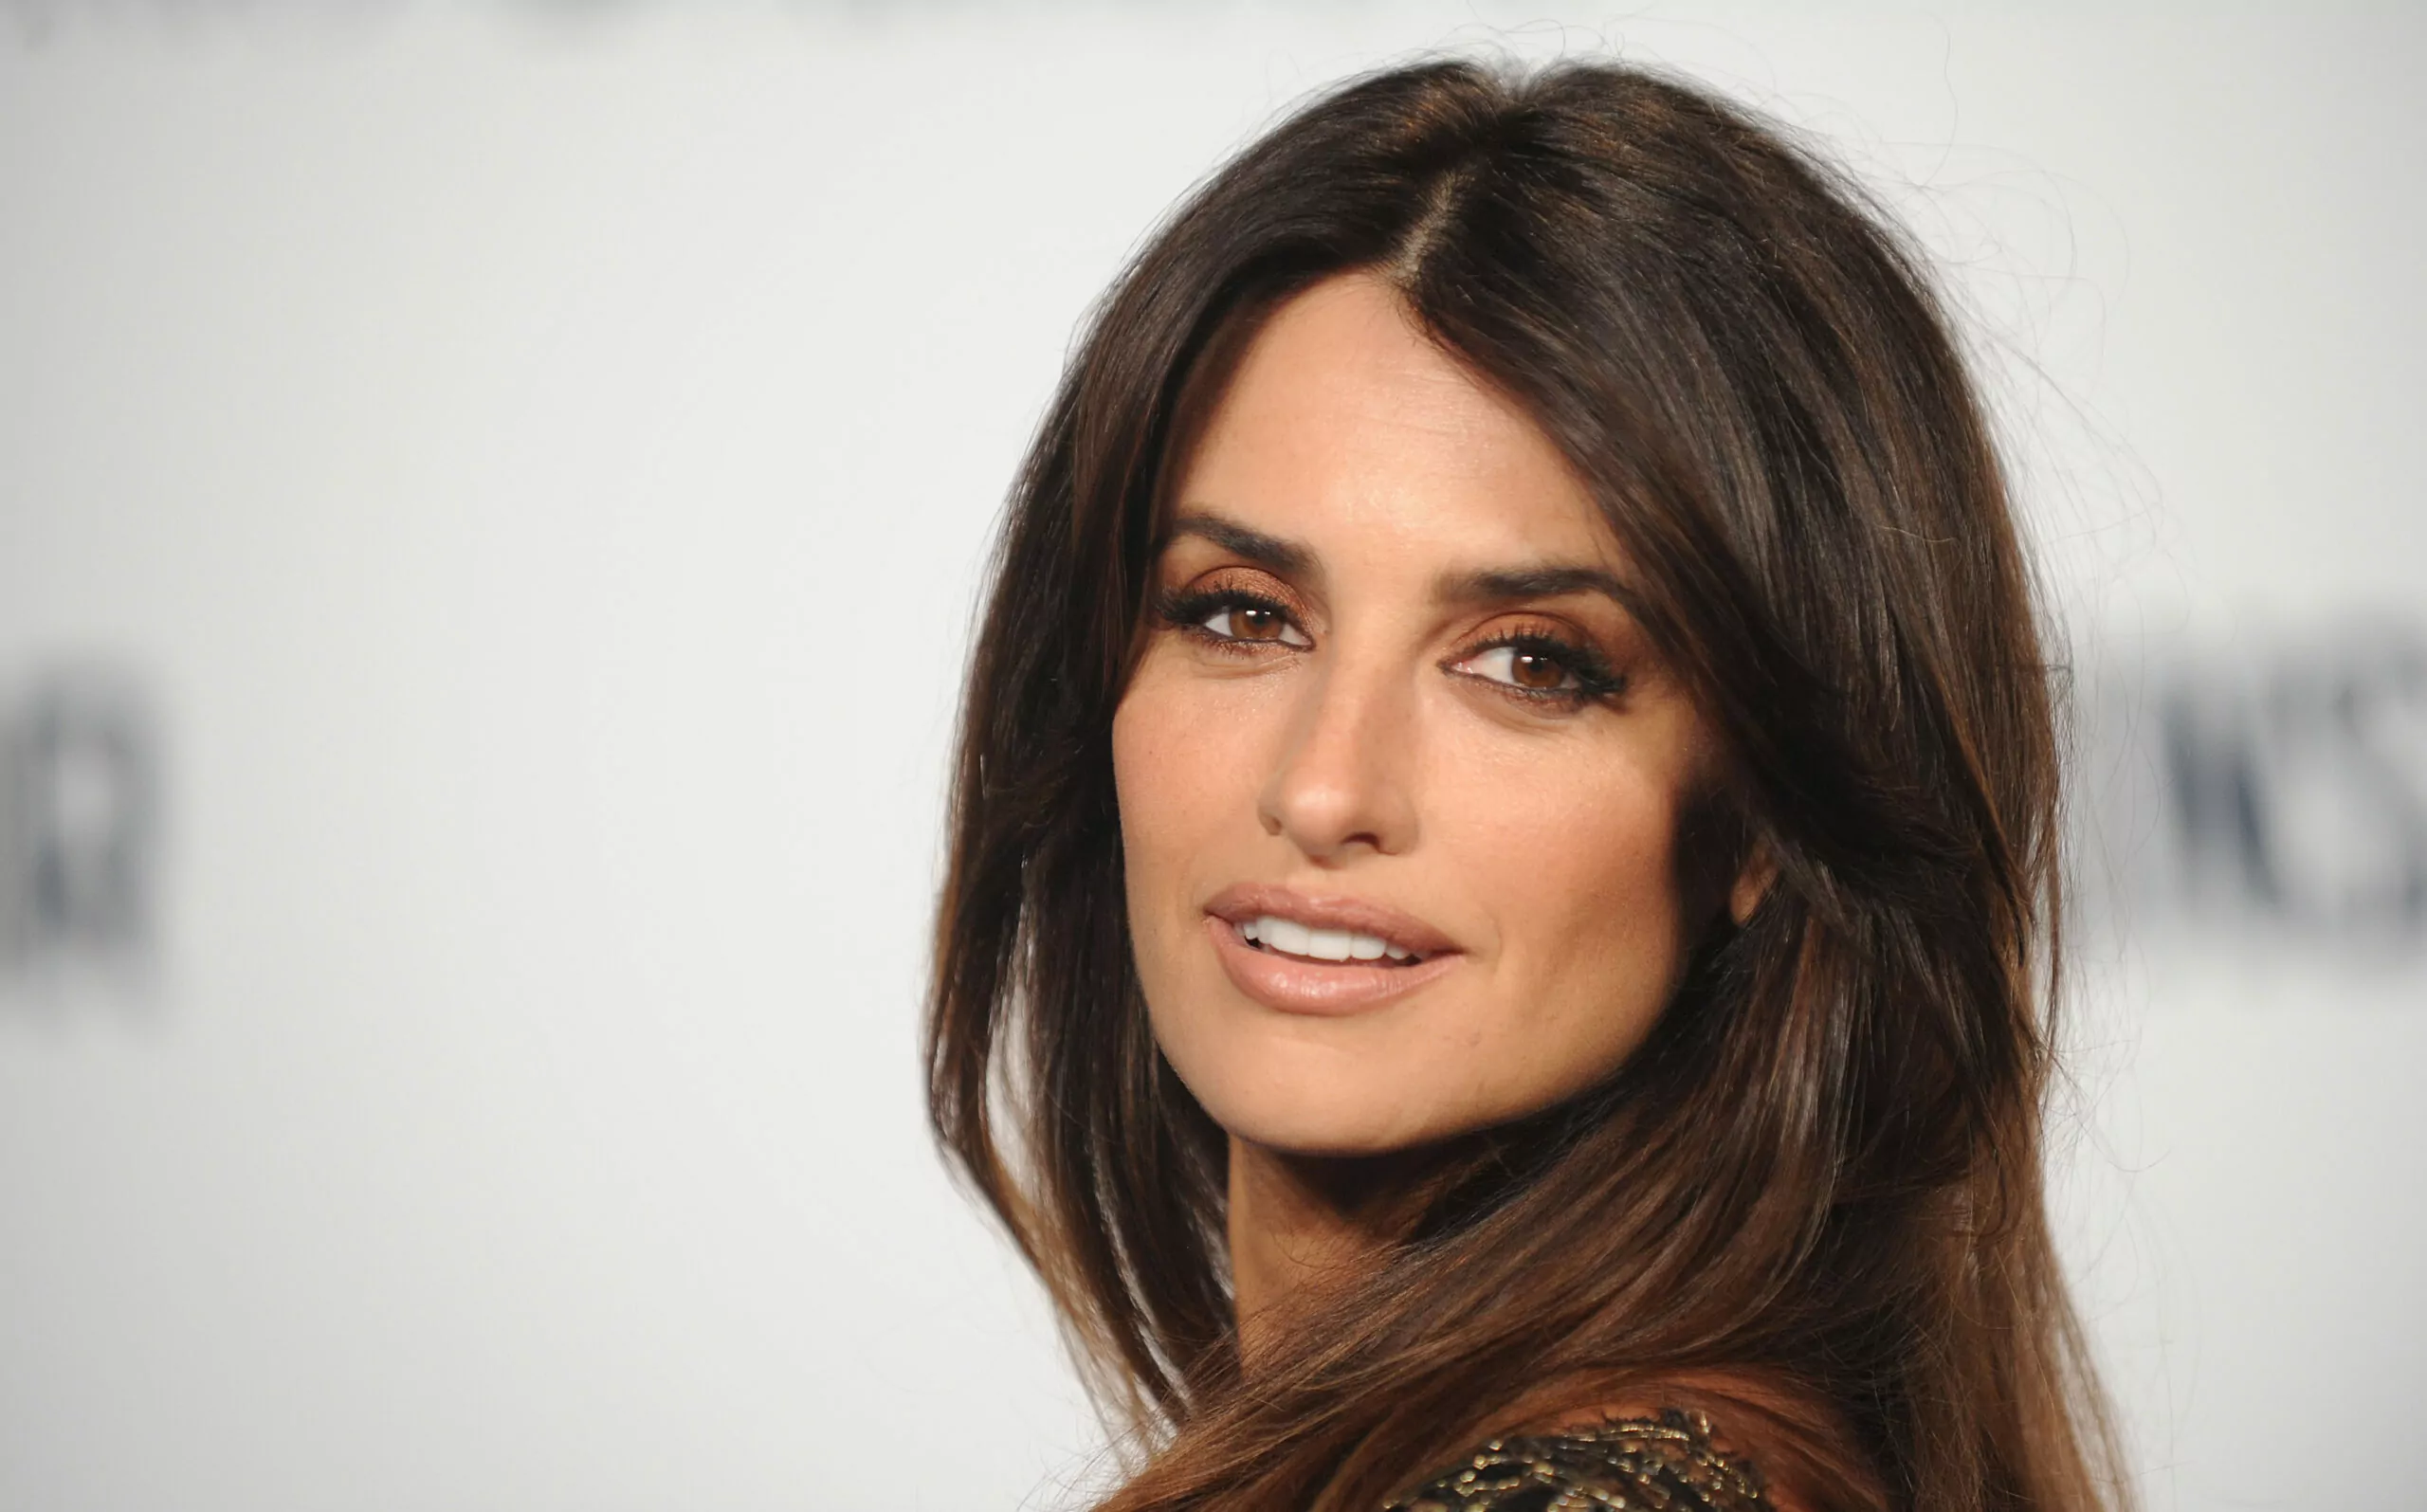 LONDON, UNITED KINGDOM - OCTOBER 03: Penelope Cruz attends a special screening of "The Counselor" at Odeon West End on October 3, 2013 in London, England. (Photo by Stuart C. Wilson/Getty Images)